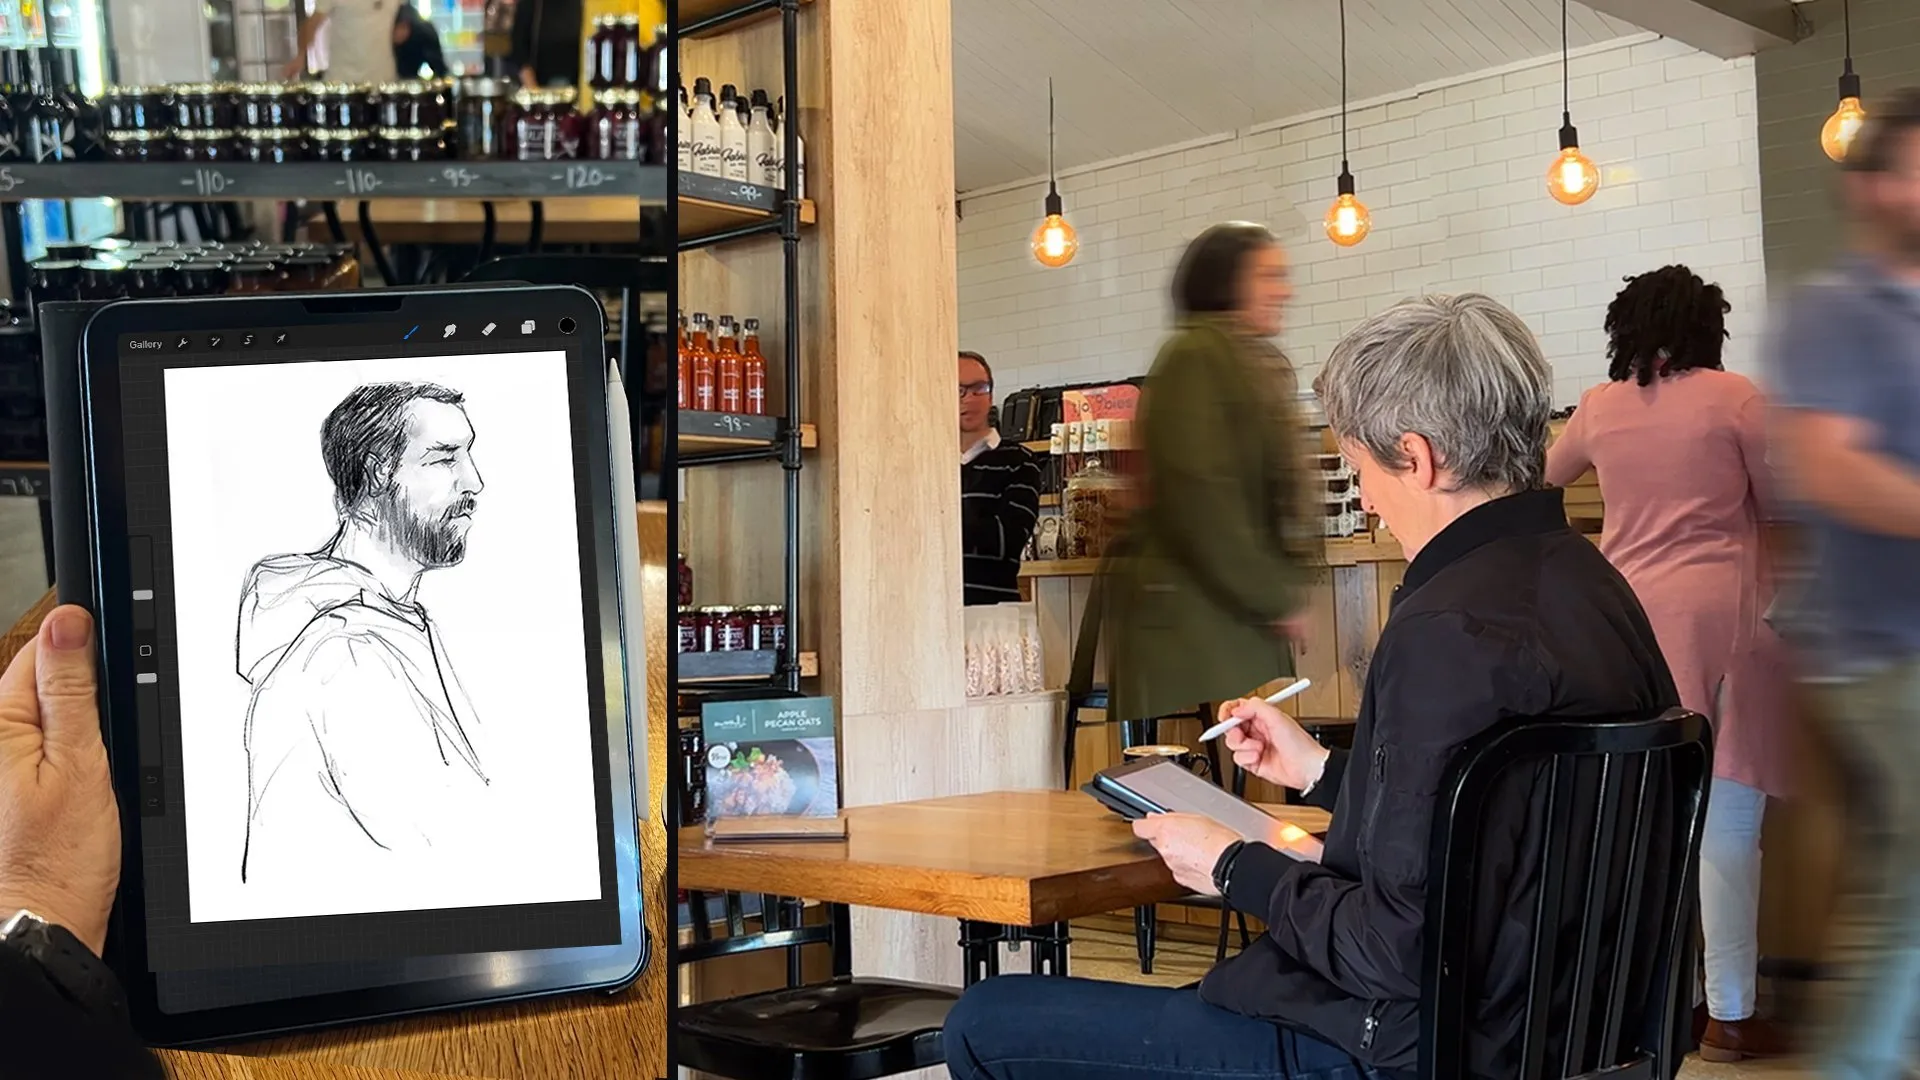 Cafe Portraits in Procreate: Explore Figure Drawing in Real Time